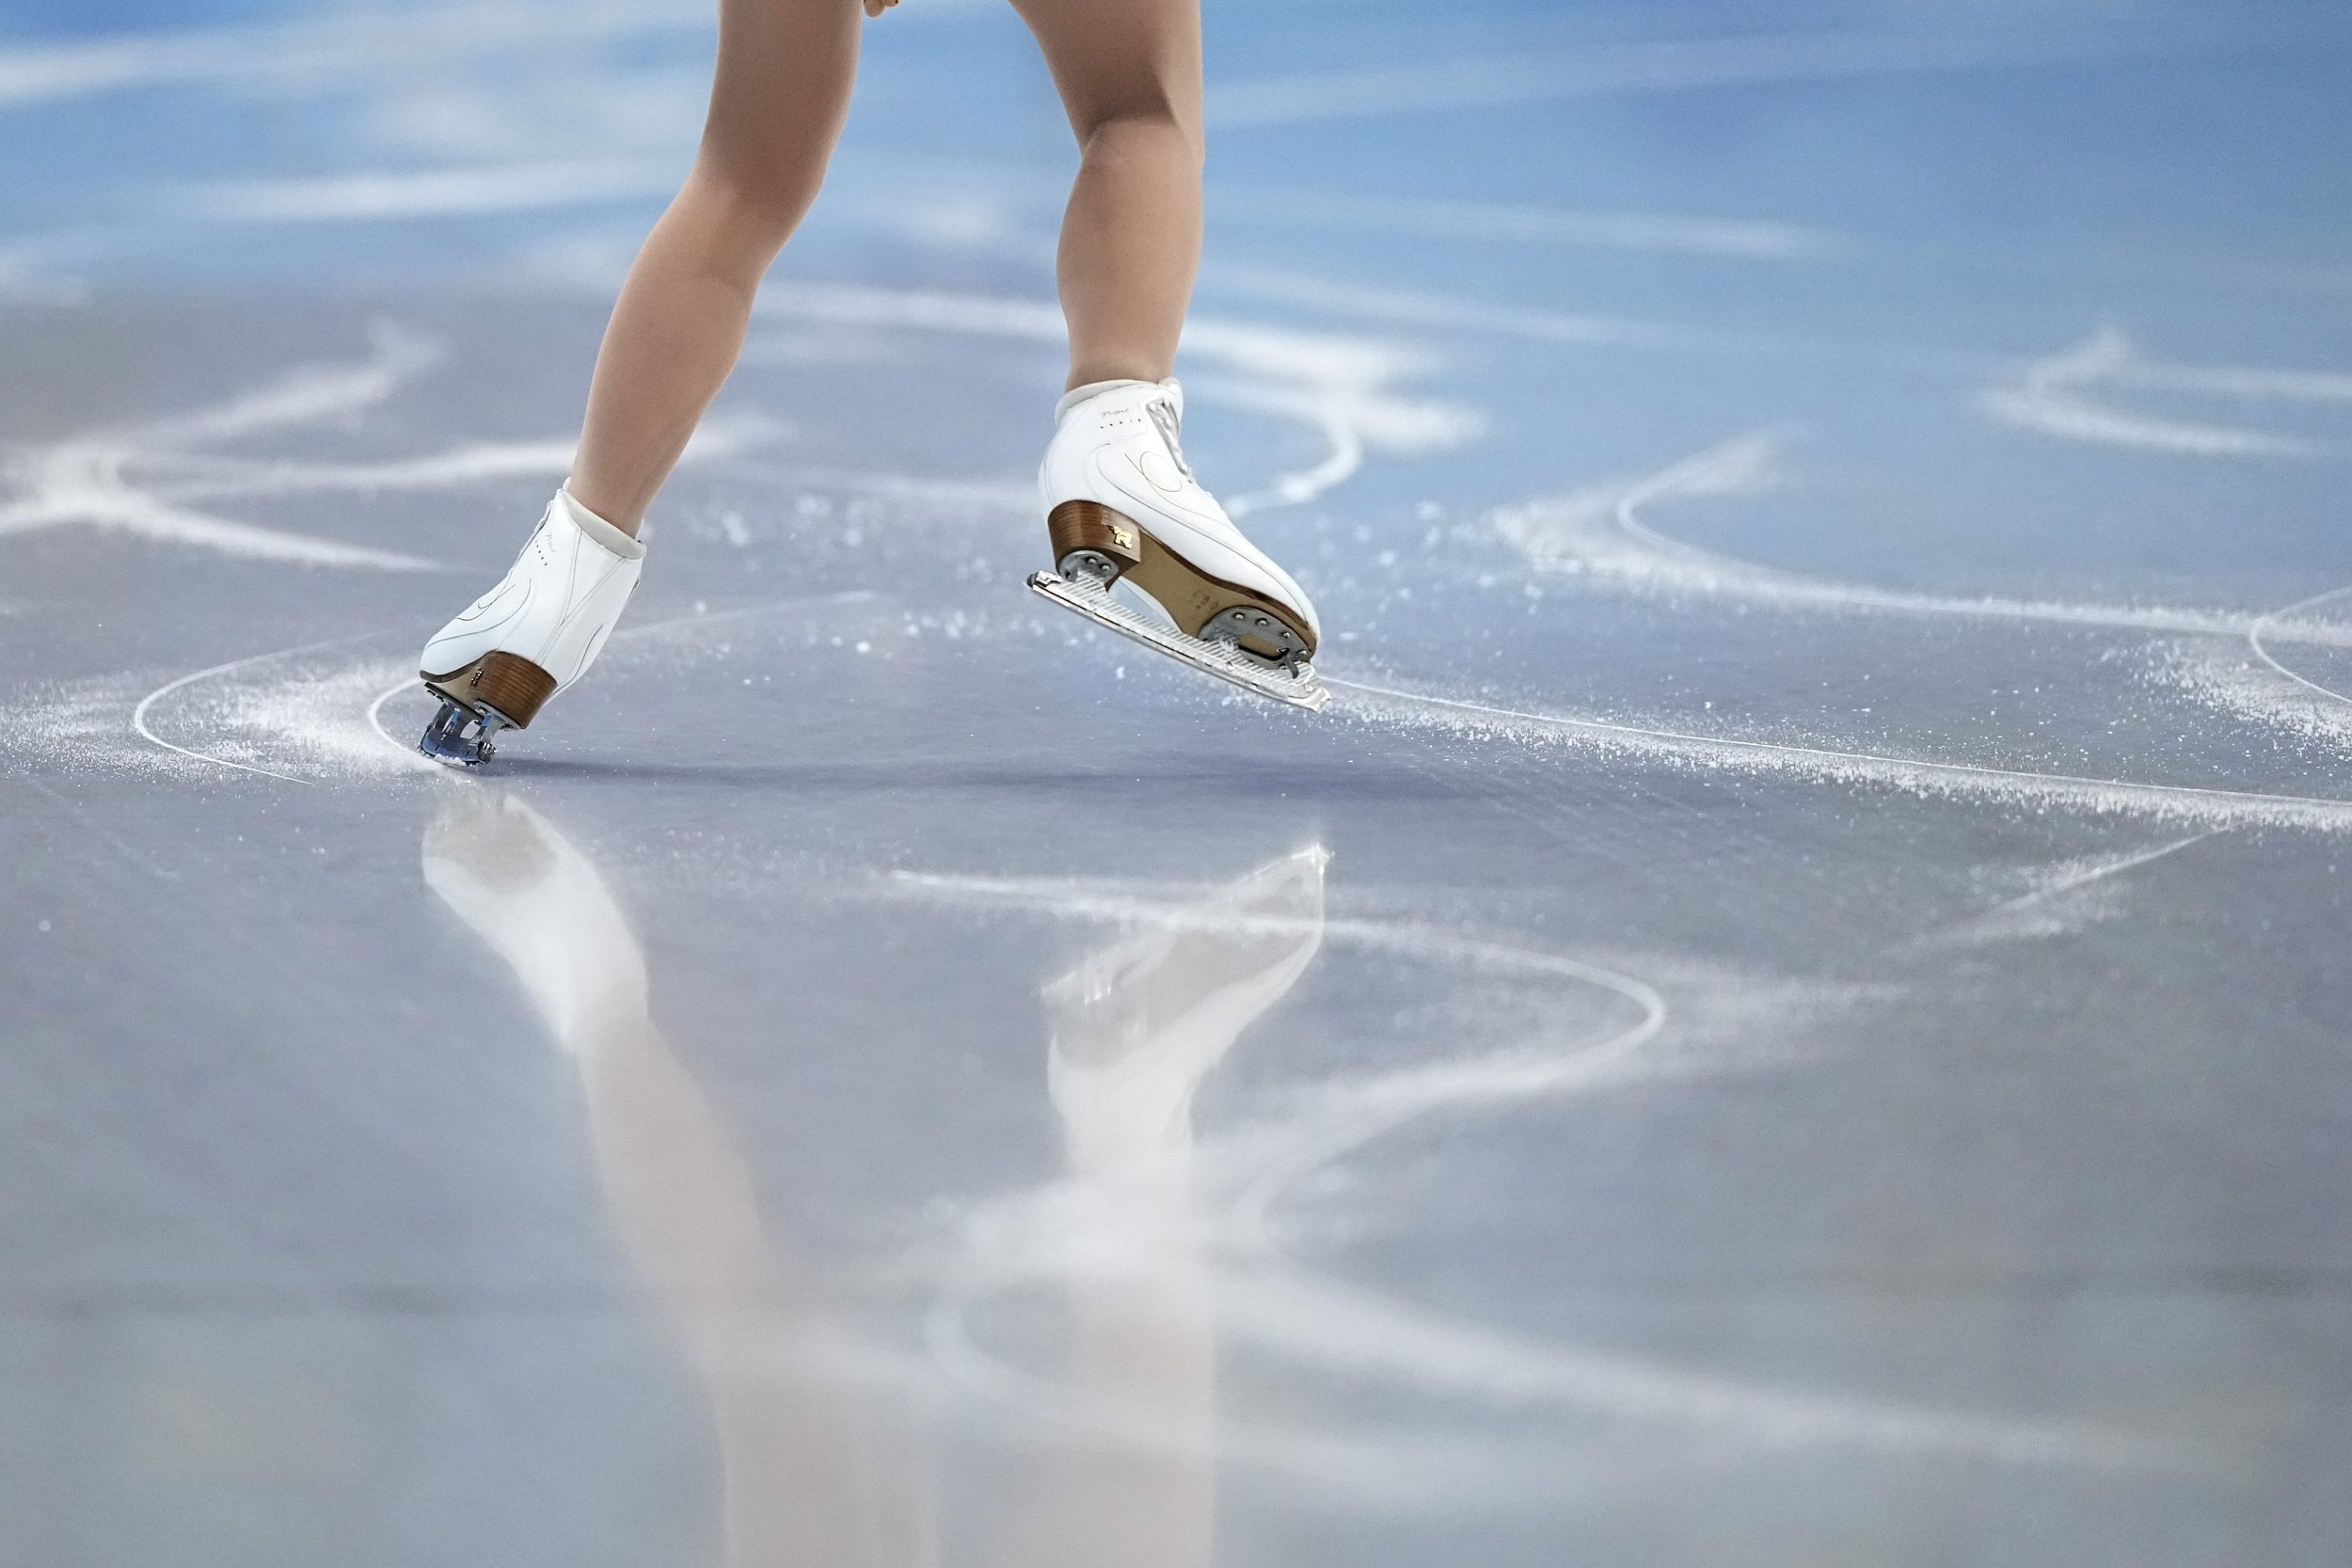  A skater warms up ahead of the women's free skate program during the figure skating competition at the 2022 Winter Olympics, Thursday, Feb. 17, 2022, in Beijing. (AP Photo/David J. Phillip) 